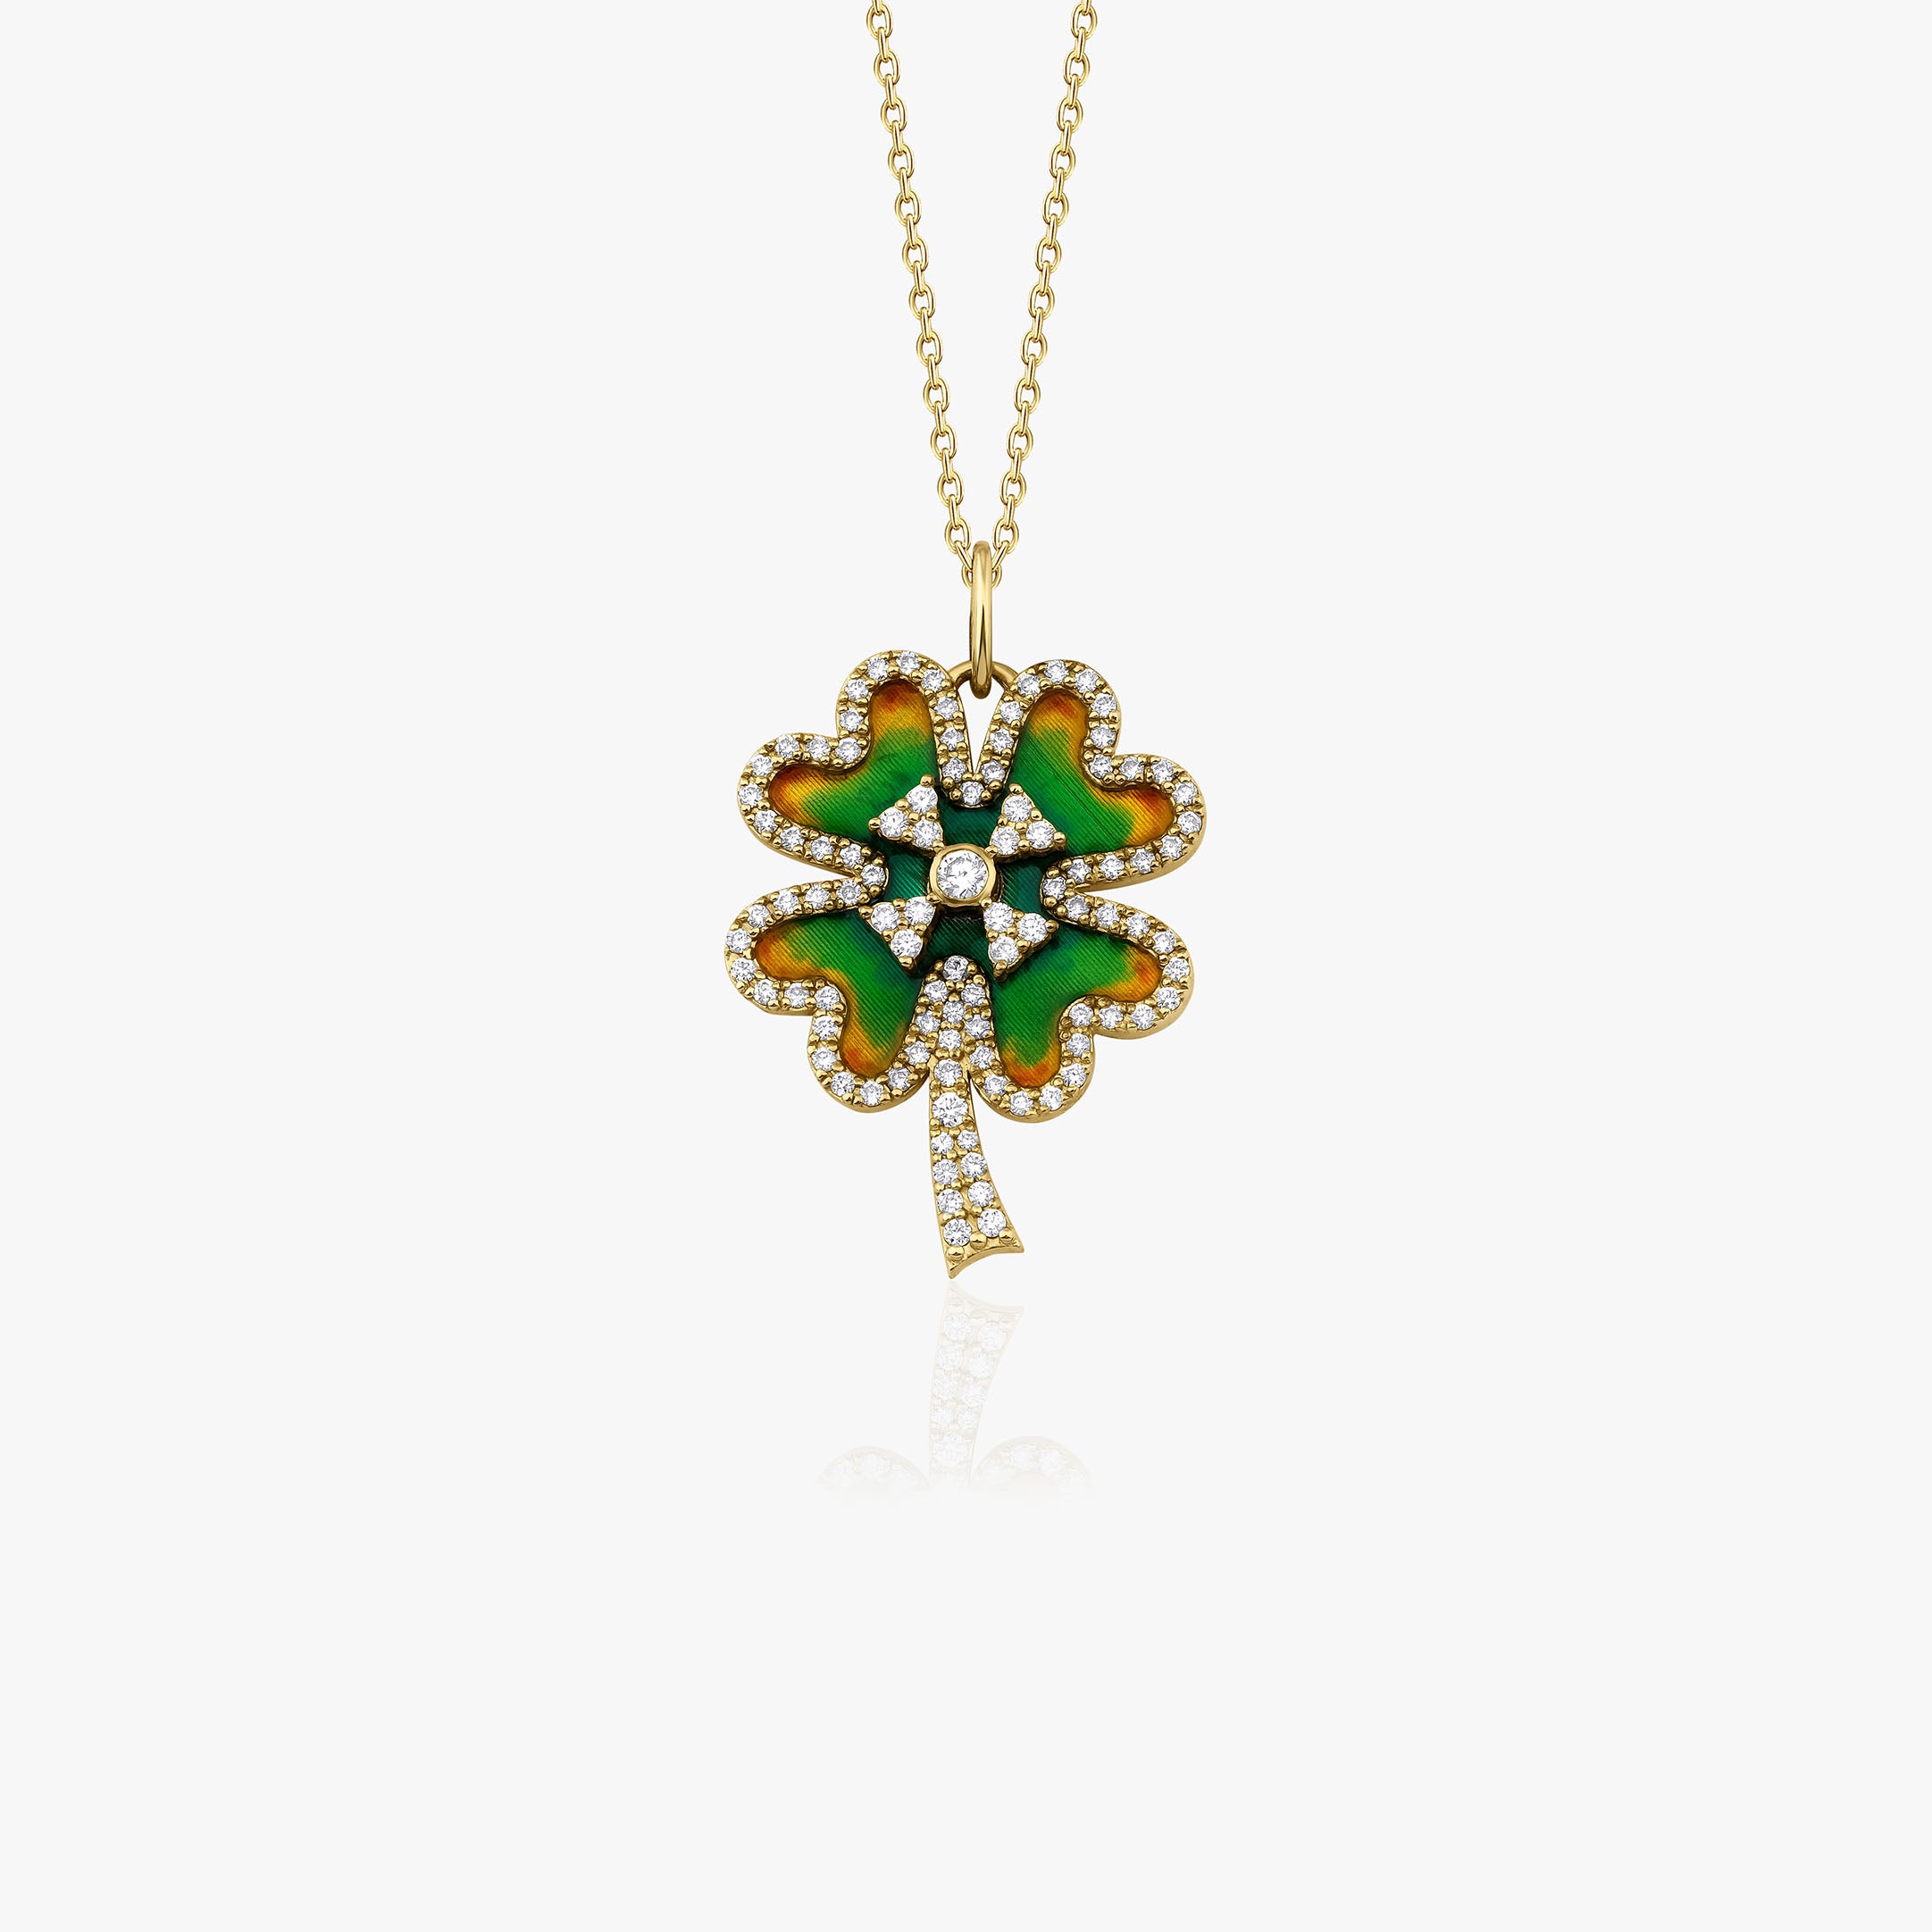 Diamond Clover Pendant Necklace Available in 14K and 18K Gold / FORTUNA